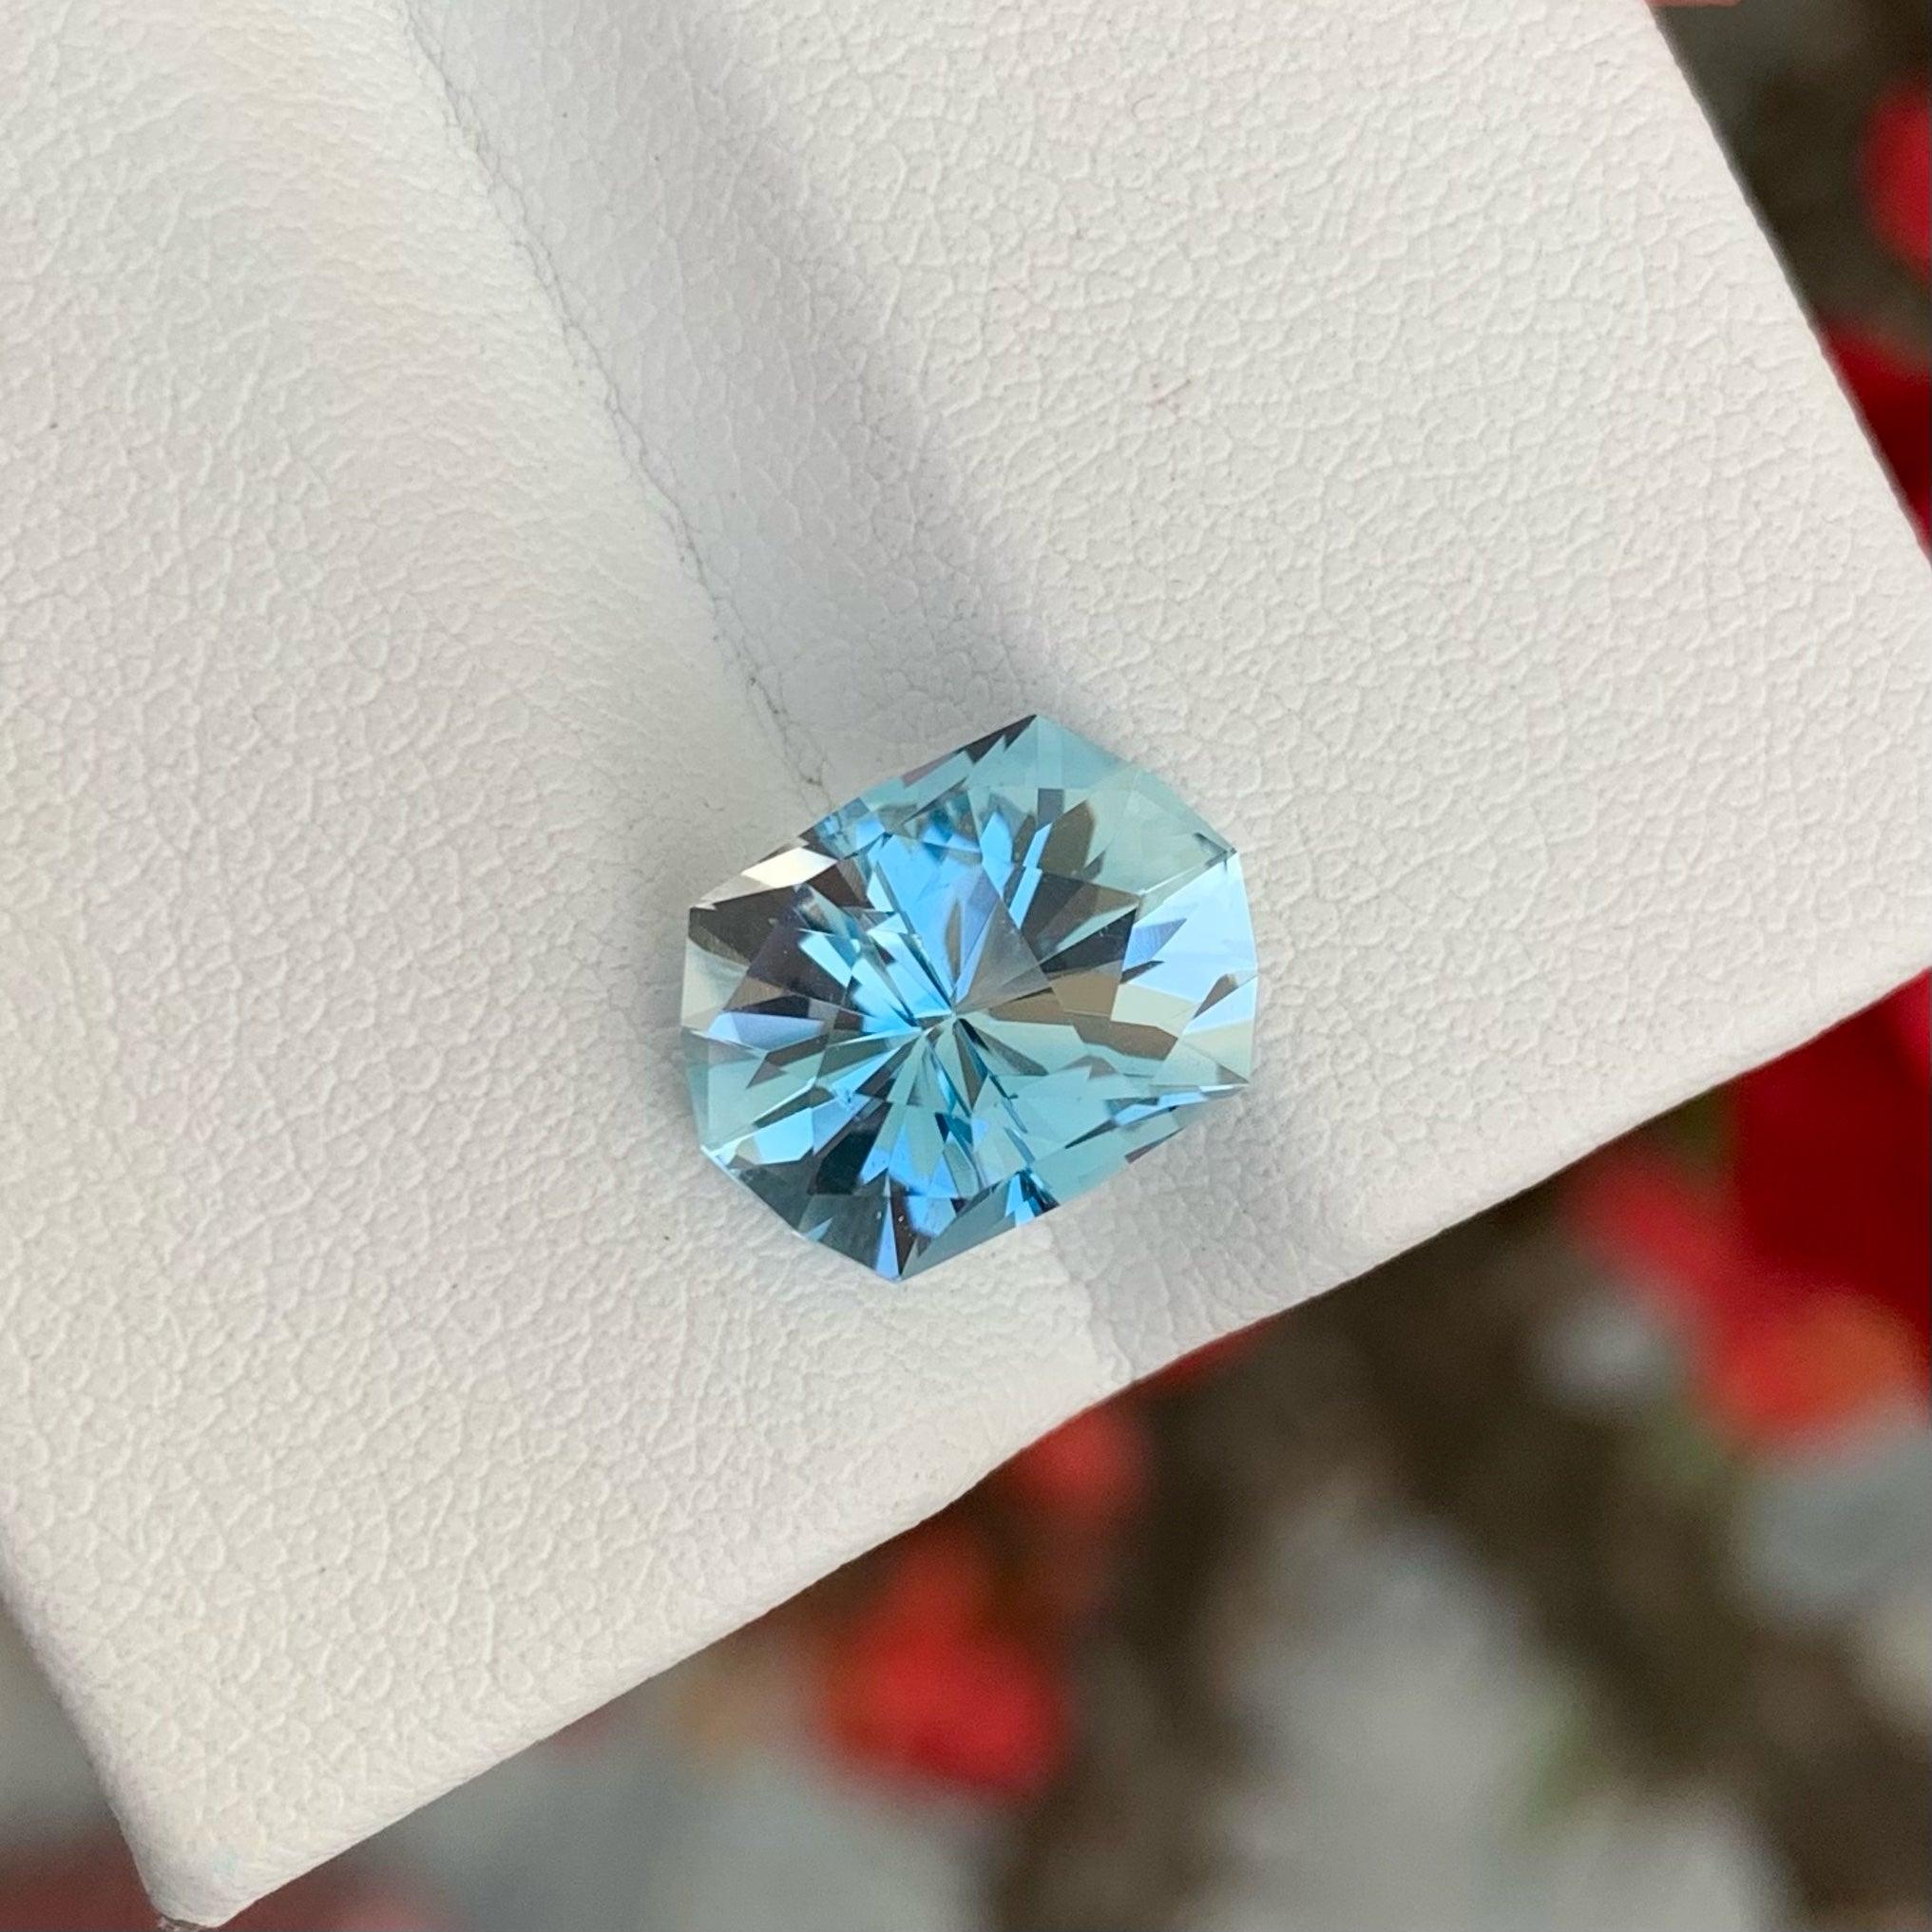 Lovely Natural Blue Loose Topaz Gemstone, available For Sale At Wholesale Price Natural High Quality 5.05 Carats Loupe Clean Clarity Normal Heat Topaz From Madagascar. 
Product Information:
GEMSTONE NAME: Lovely Natural Blue Loose Topaz